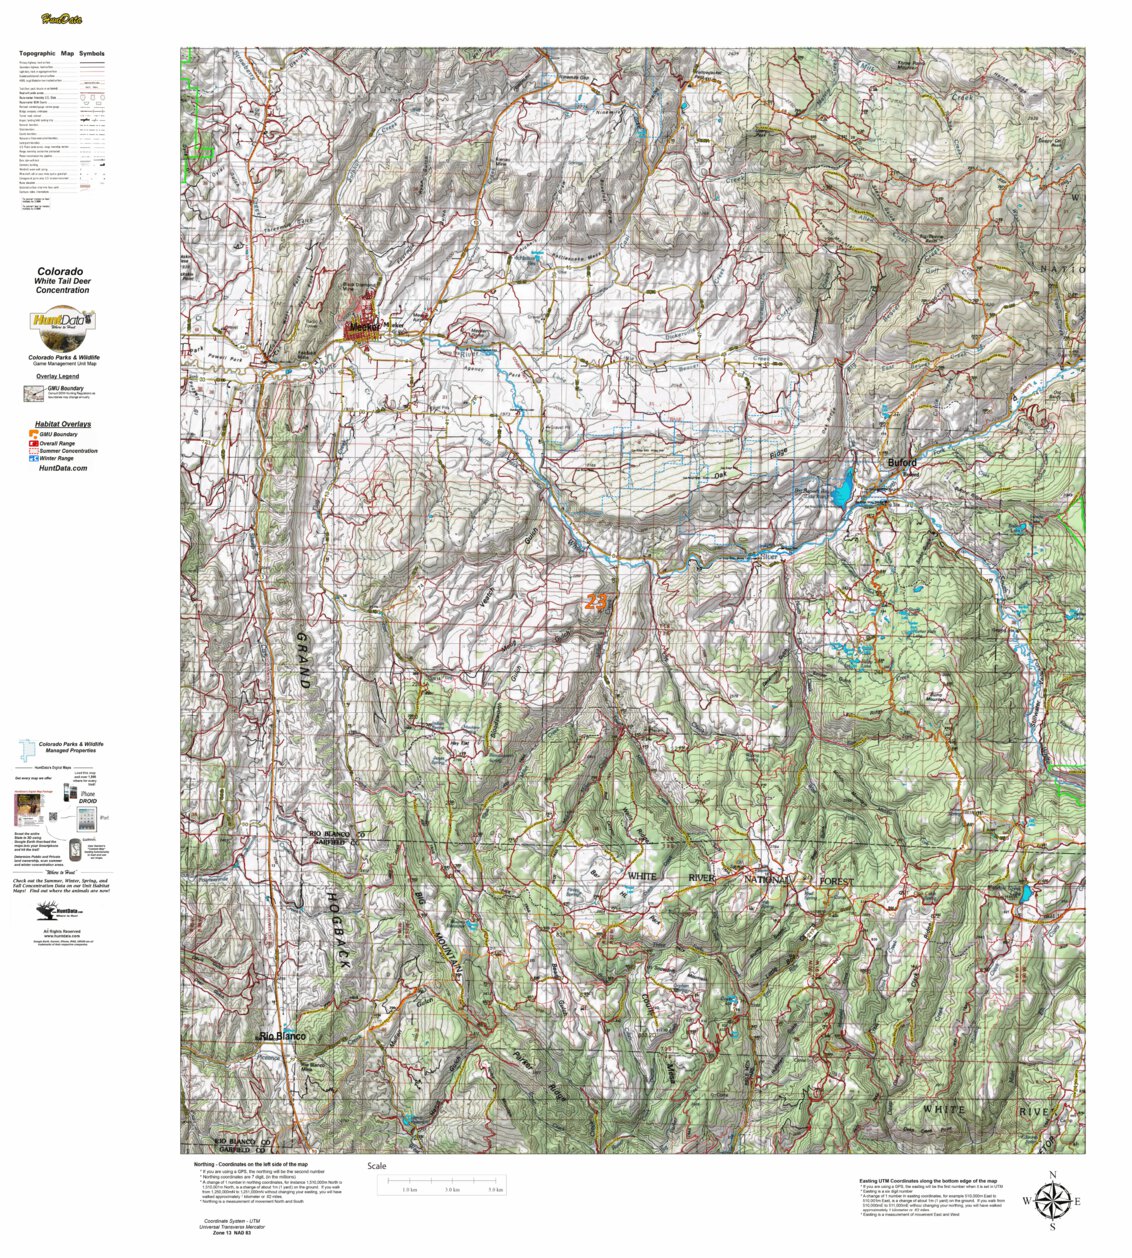 CO_23_White_Tail_Deer_Habitat map by Colorado HuntData LLC | Avenza Maps